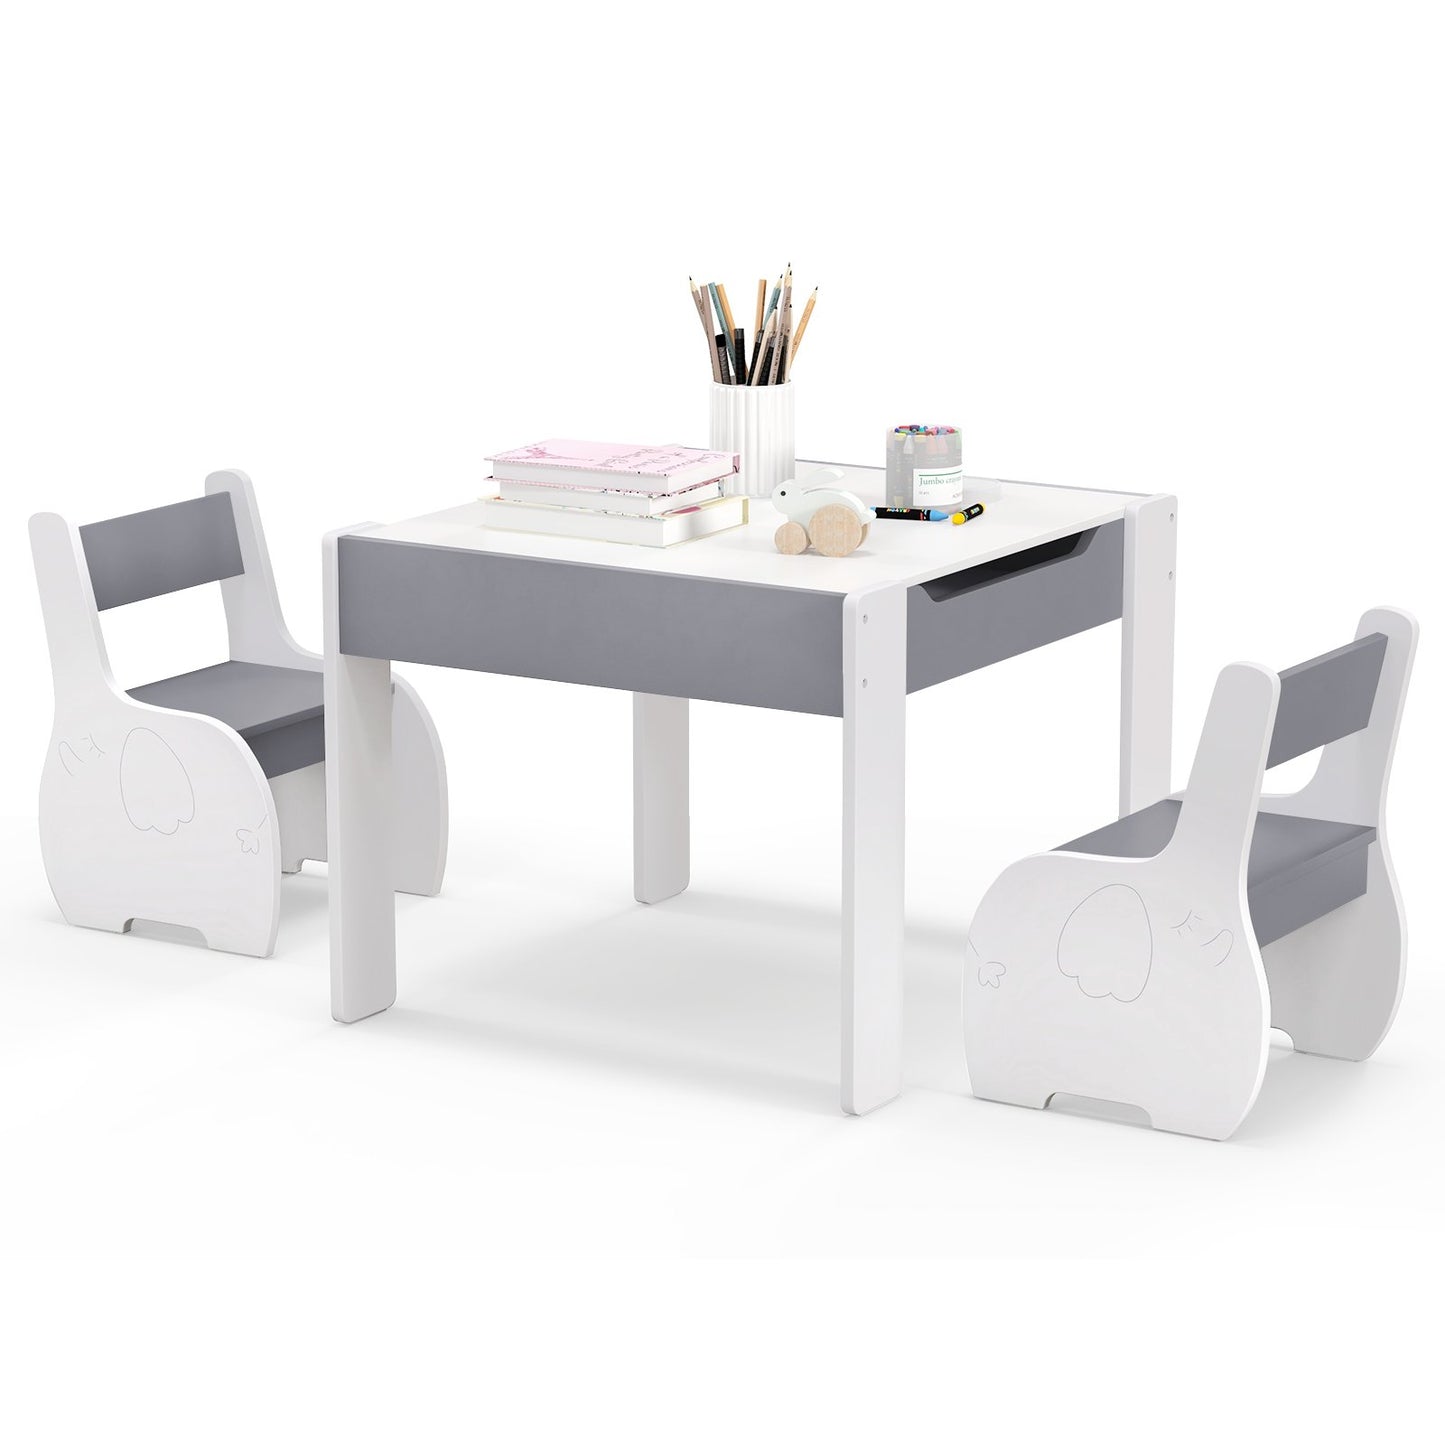 4-in-1 Wooden Activity Kids Table and Chairs with Storage and Detachable Blackboard, Gray